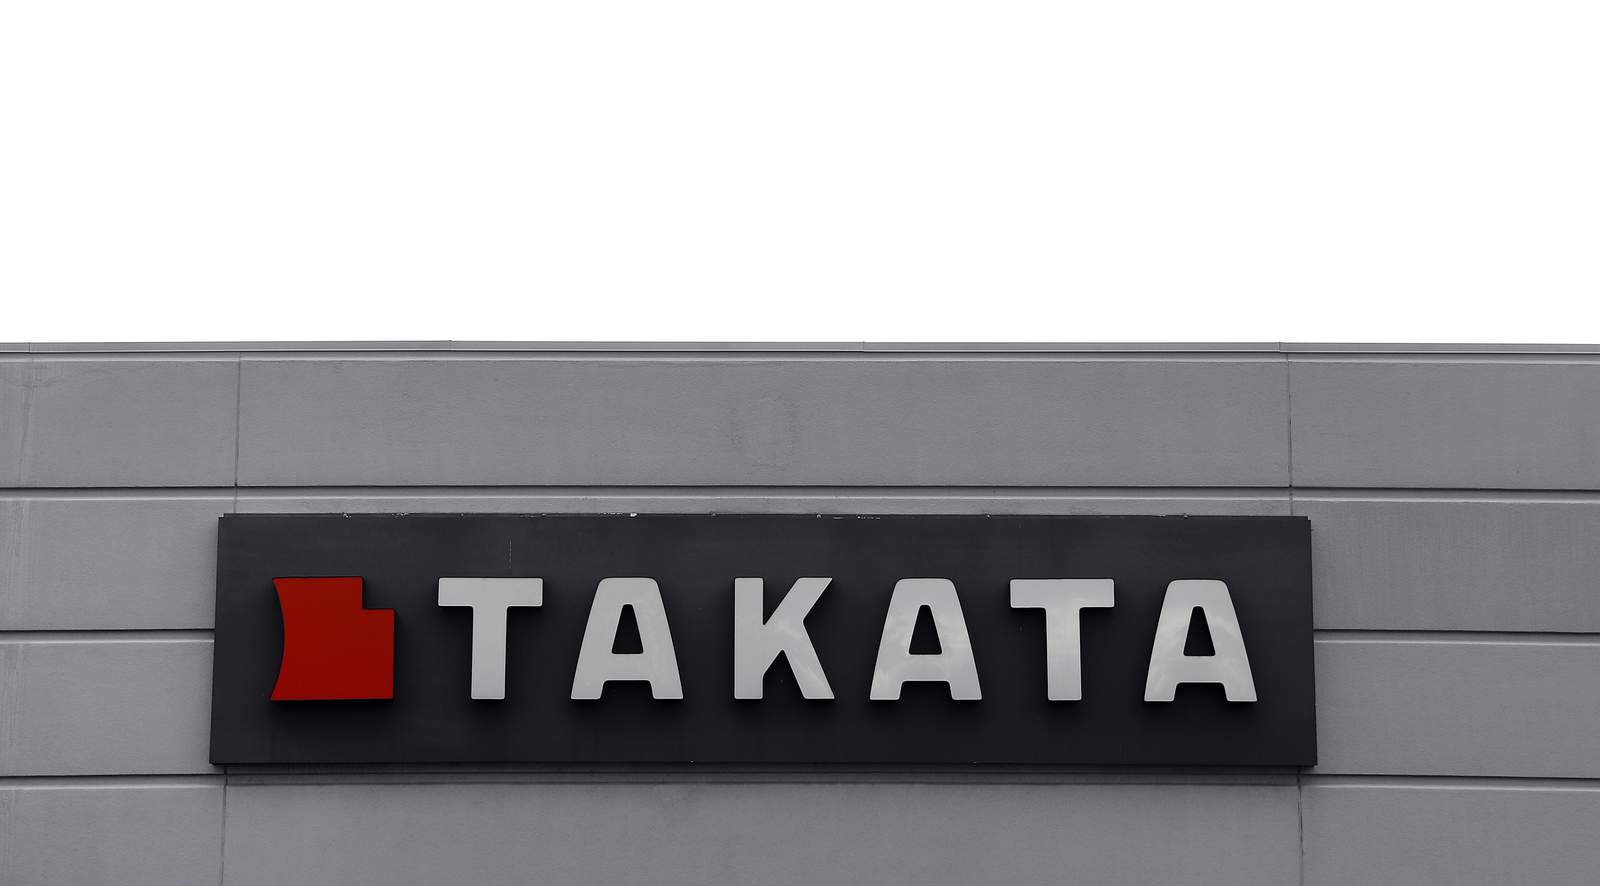 US rejects Ford, Mazda requests to avoid Takata recalls